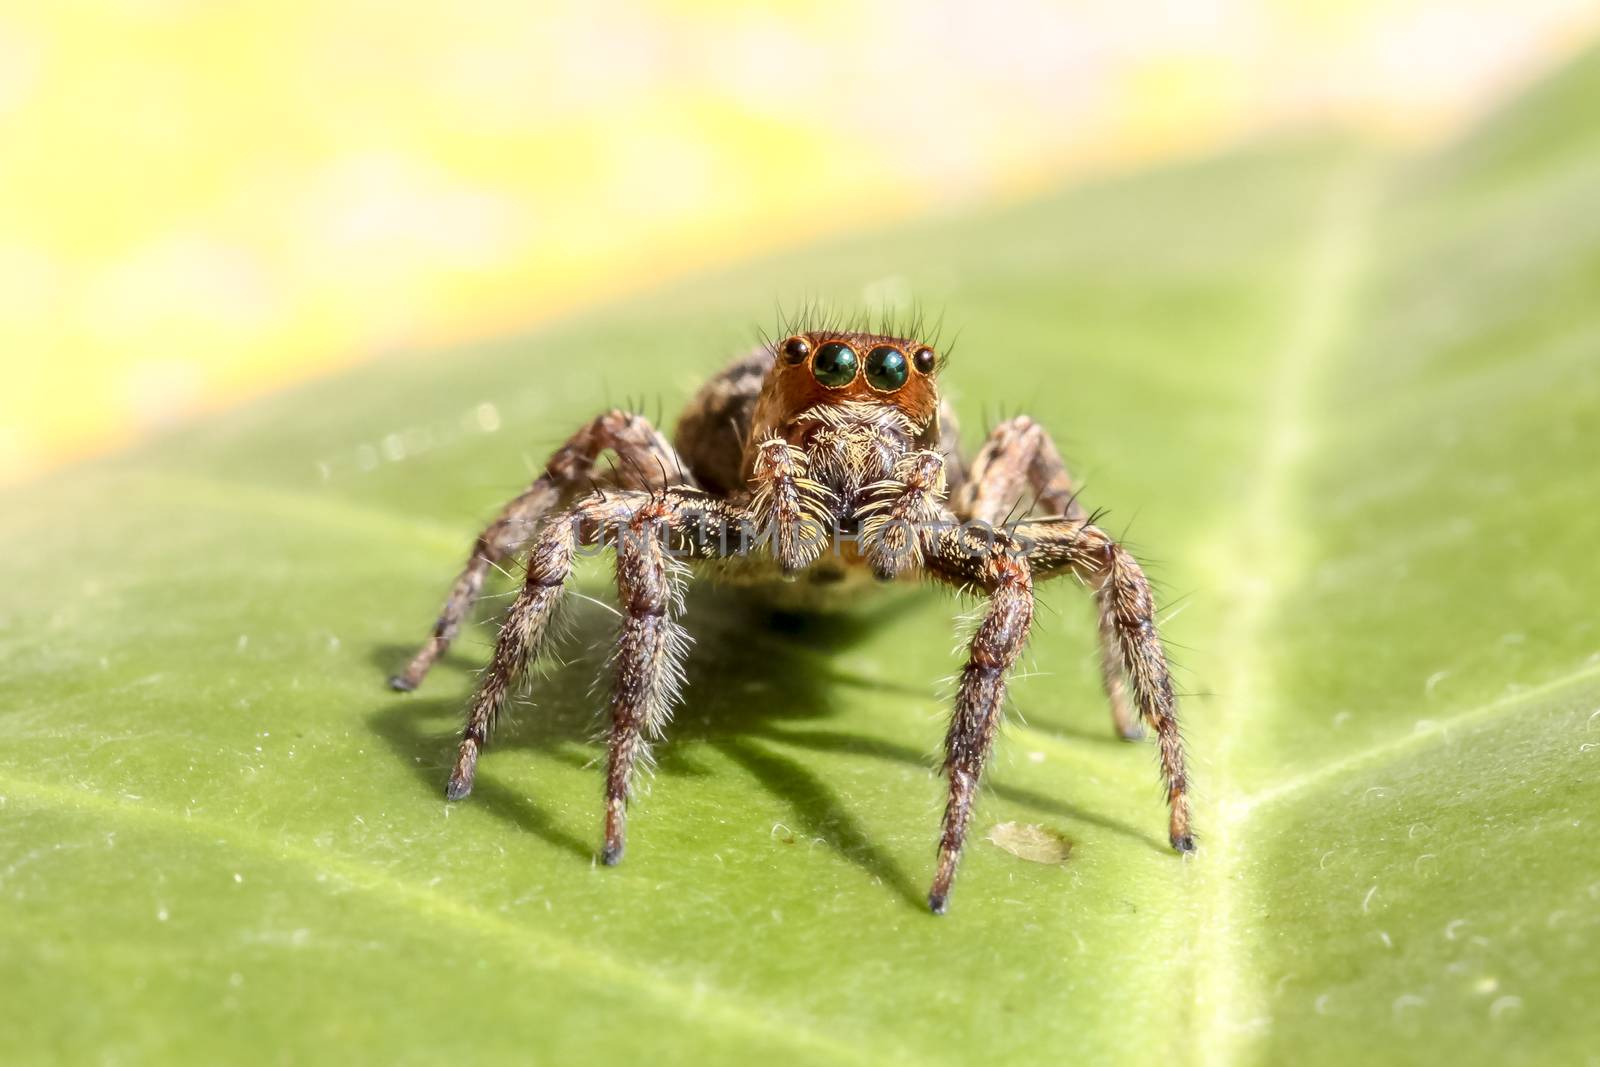 Jumping Spider by Chattranusorn09